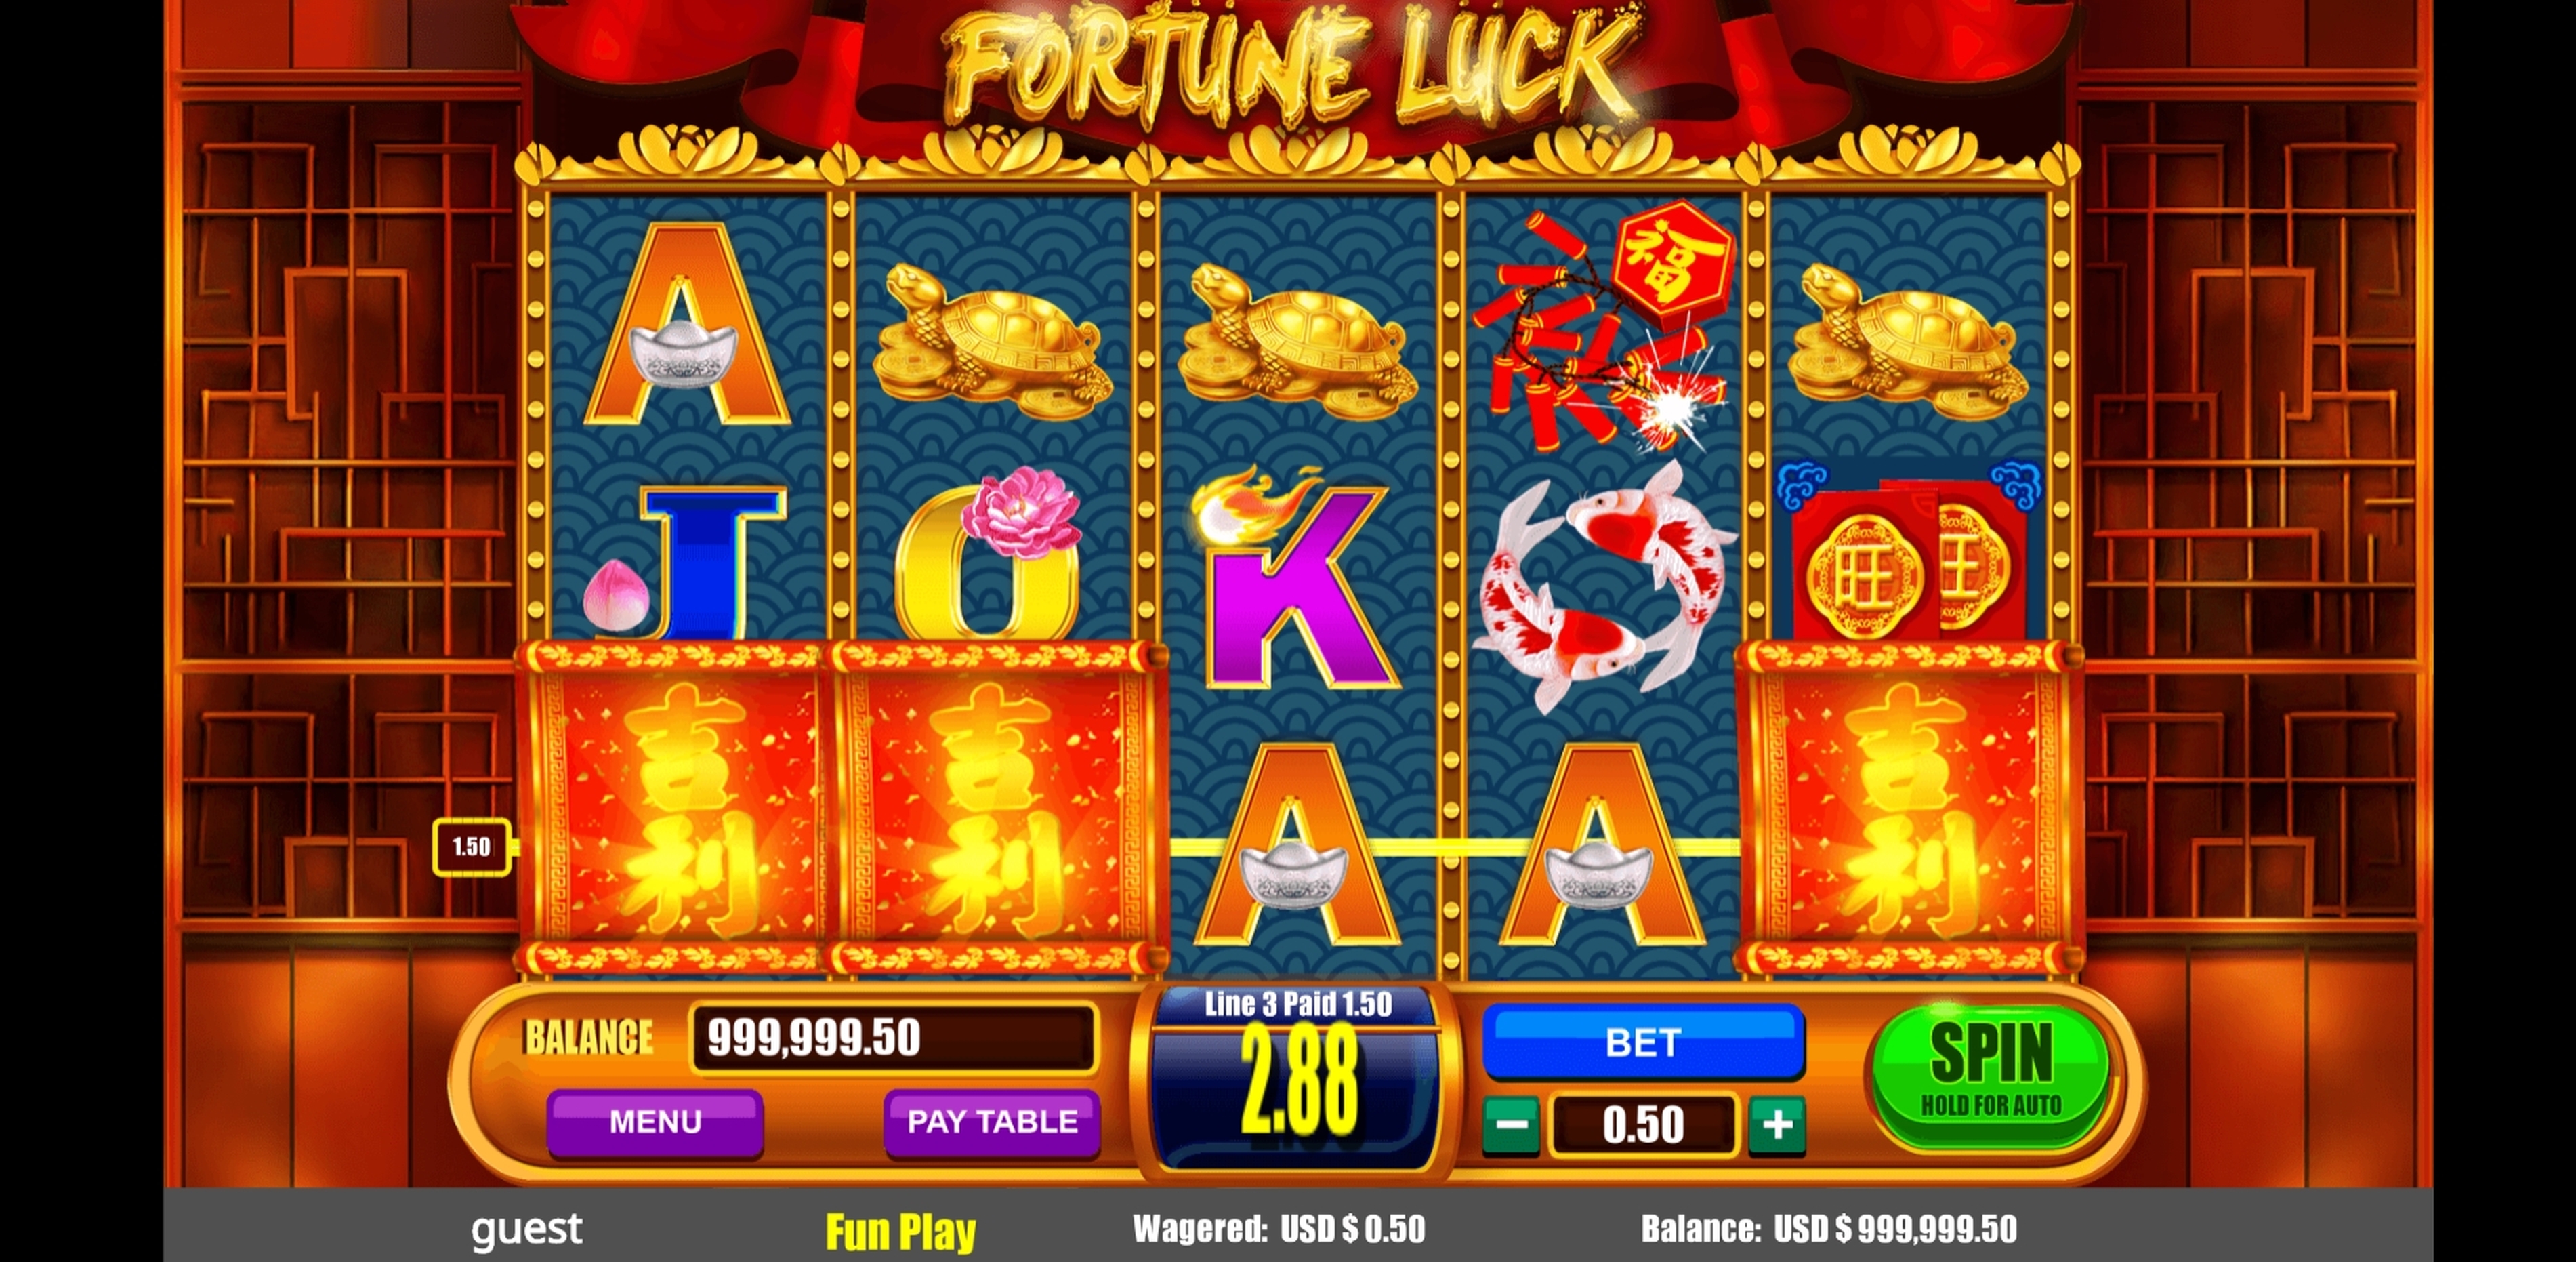 Win Money in Fortune Luck Free Slot Game by August Gaming